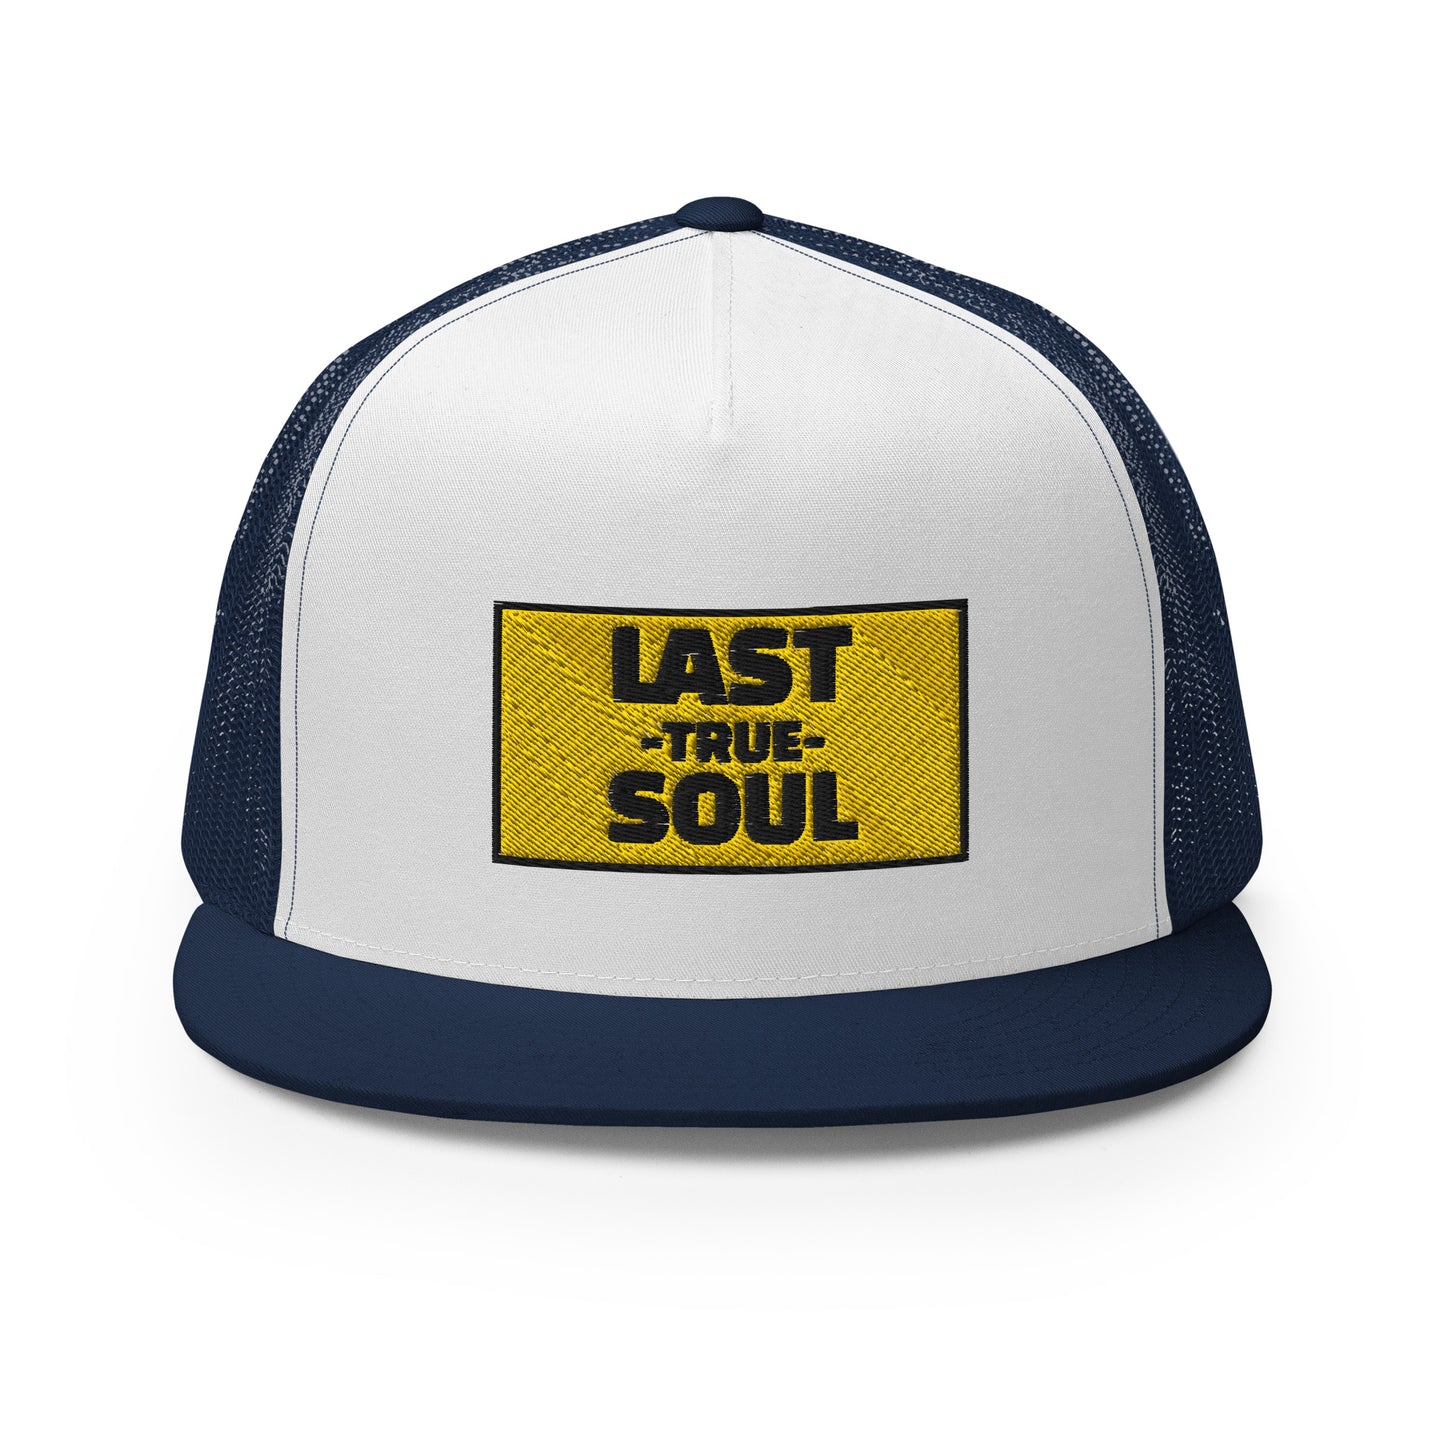 Embroidered Nametag Trucker Cap by LastTrueSouL